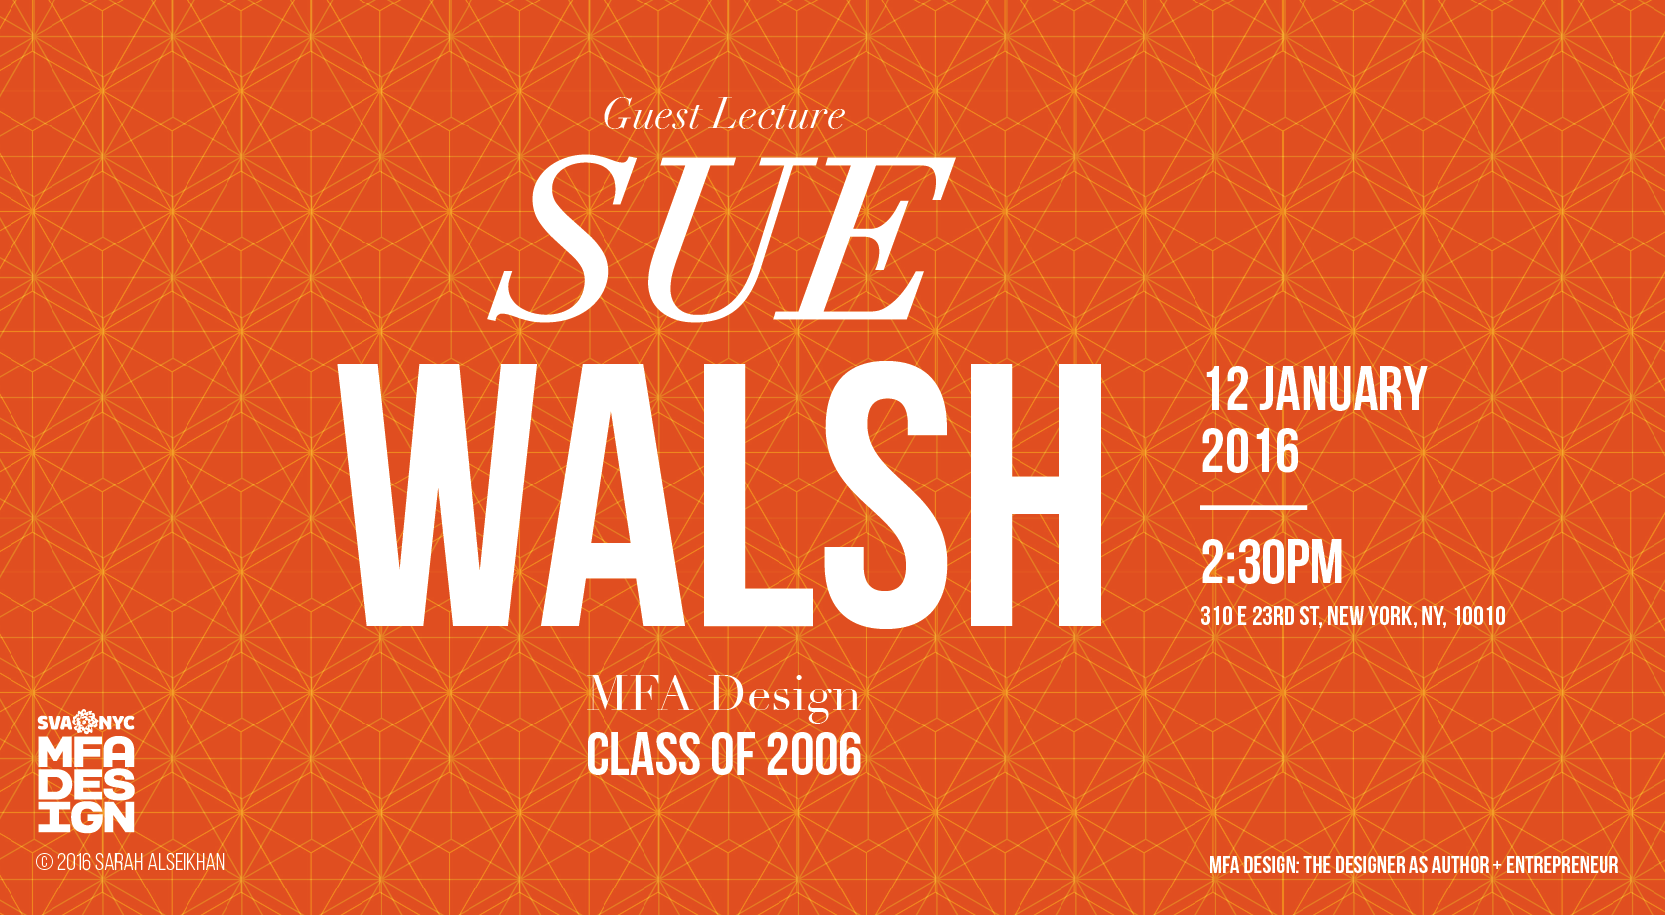 A red poster with isometric hexagonal patterns. On it there is the white text: Guest Lecture SUE WALSH. SVA NYC MFA Design logo.